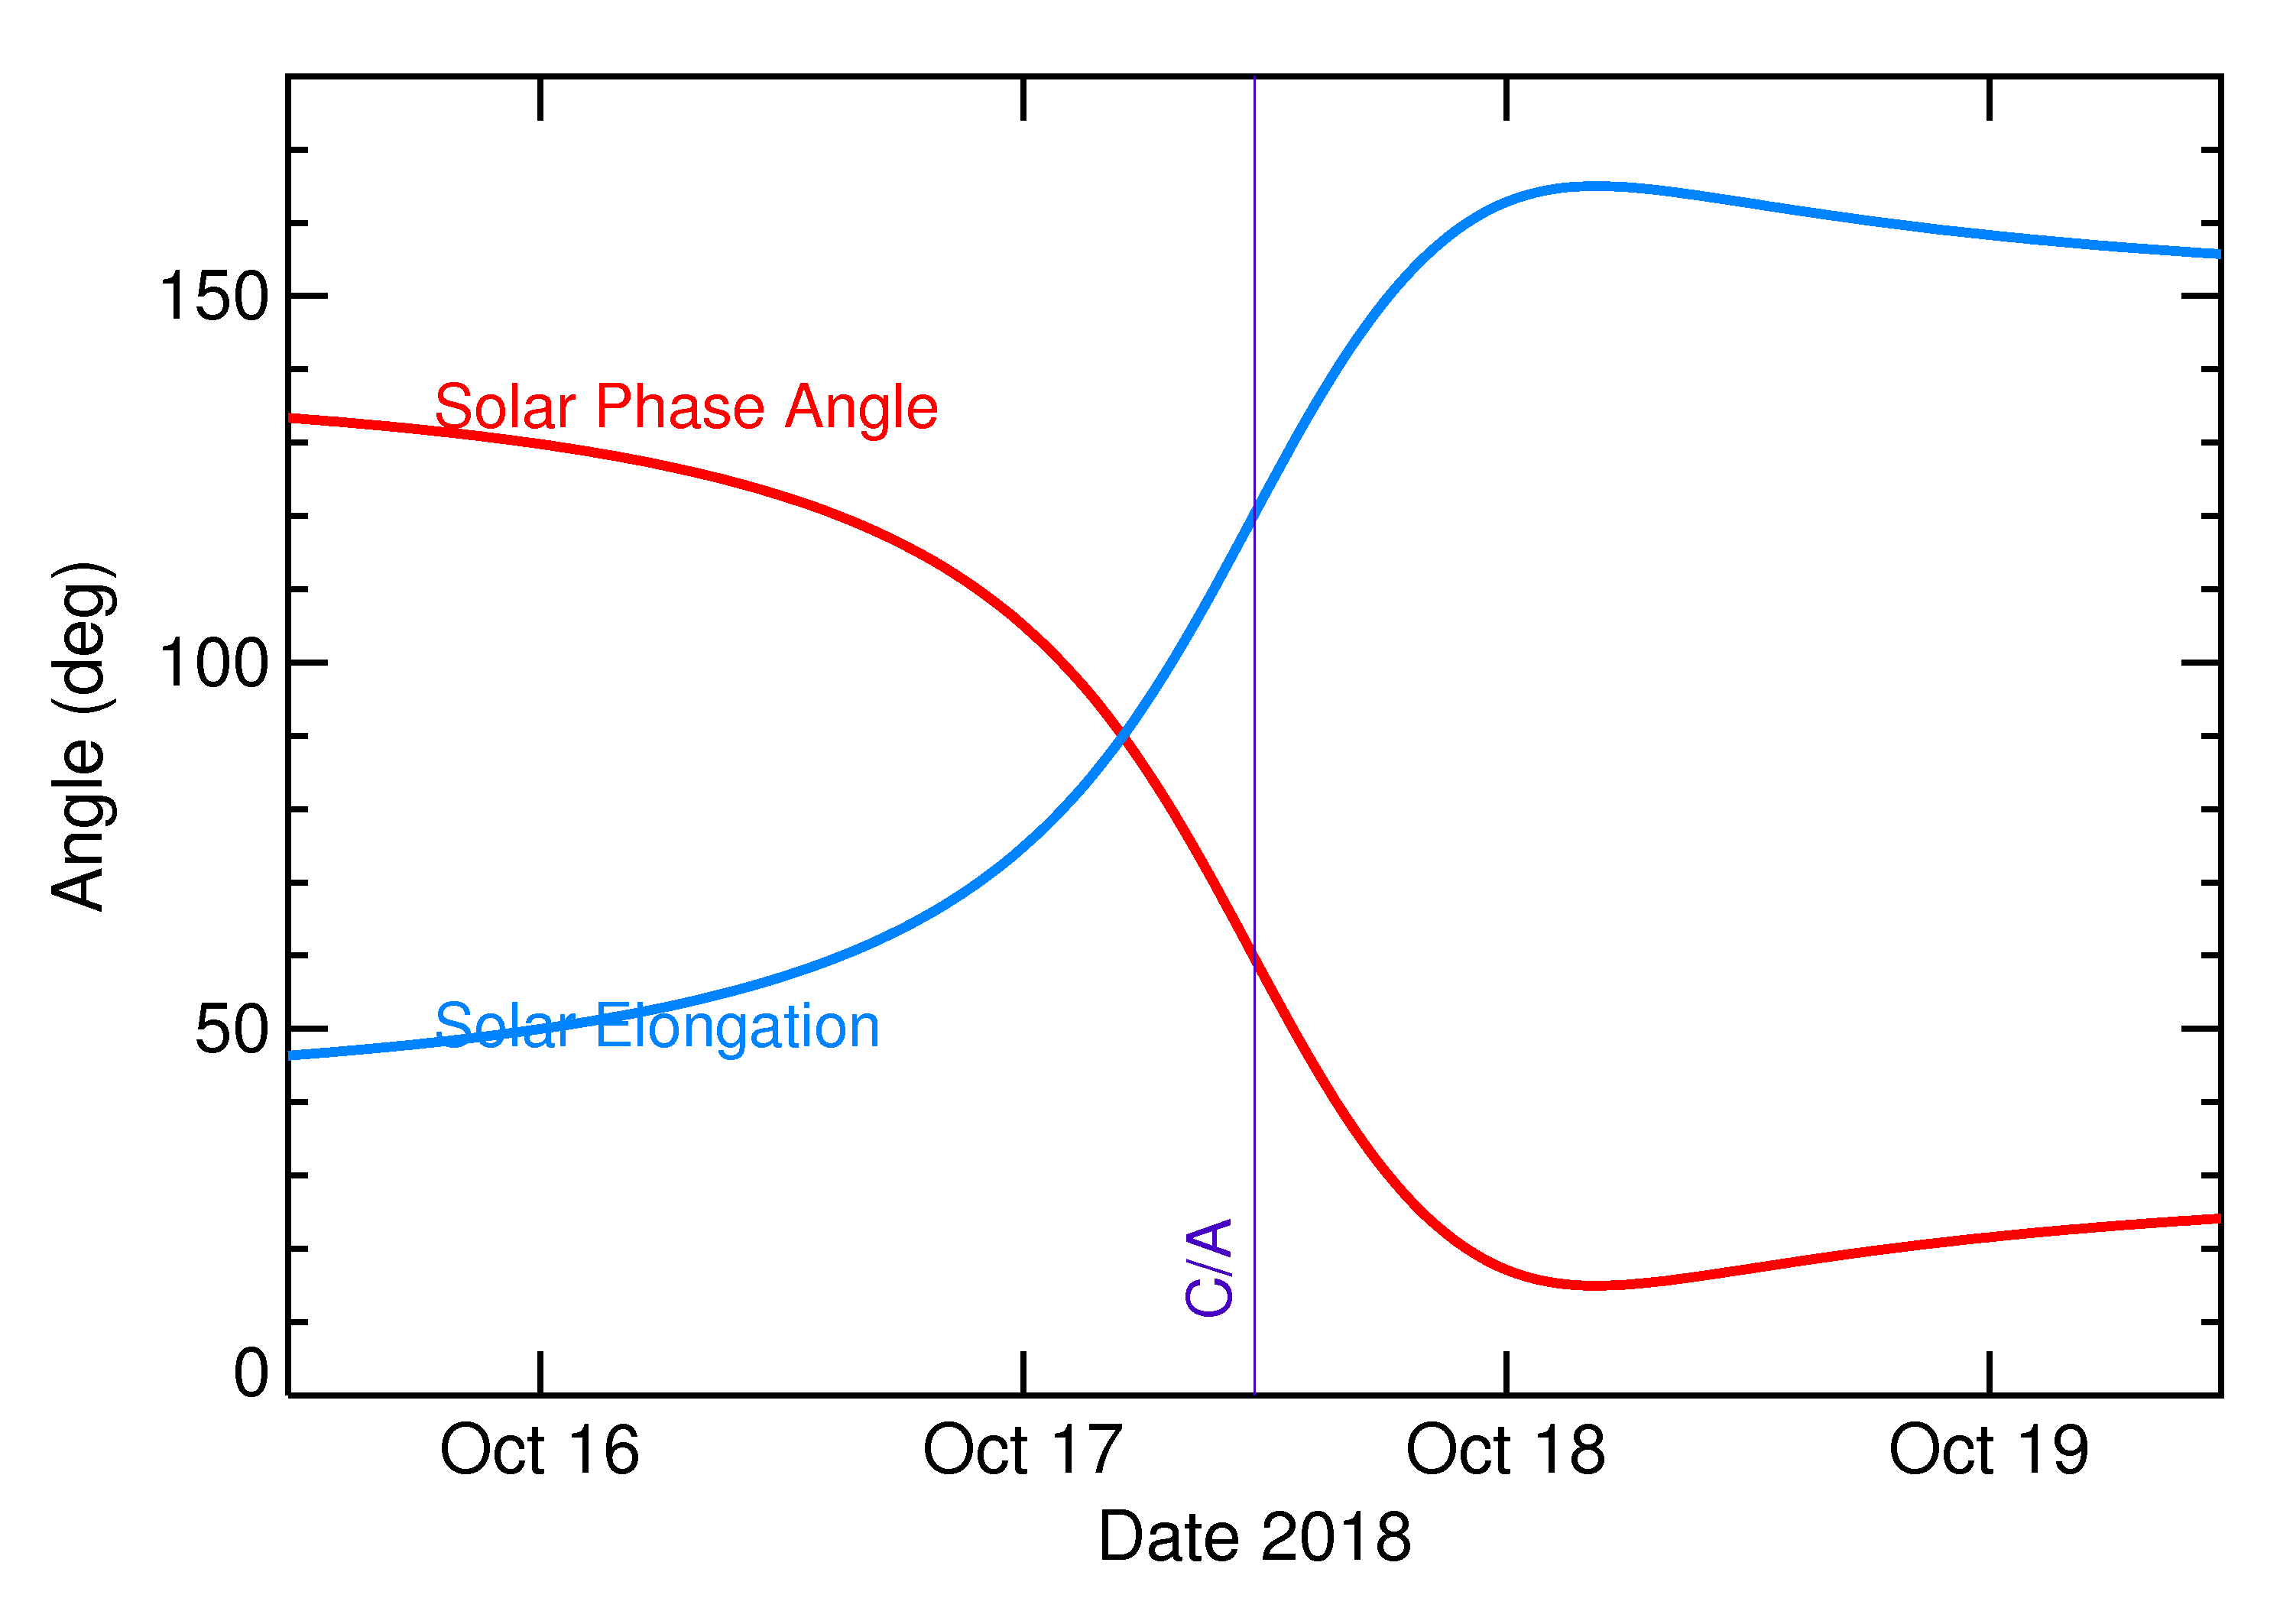 Solar Elongation and Solar Phase Angle of 2018 UL in the days around closest approach